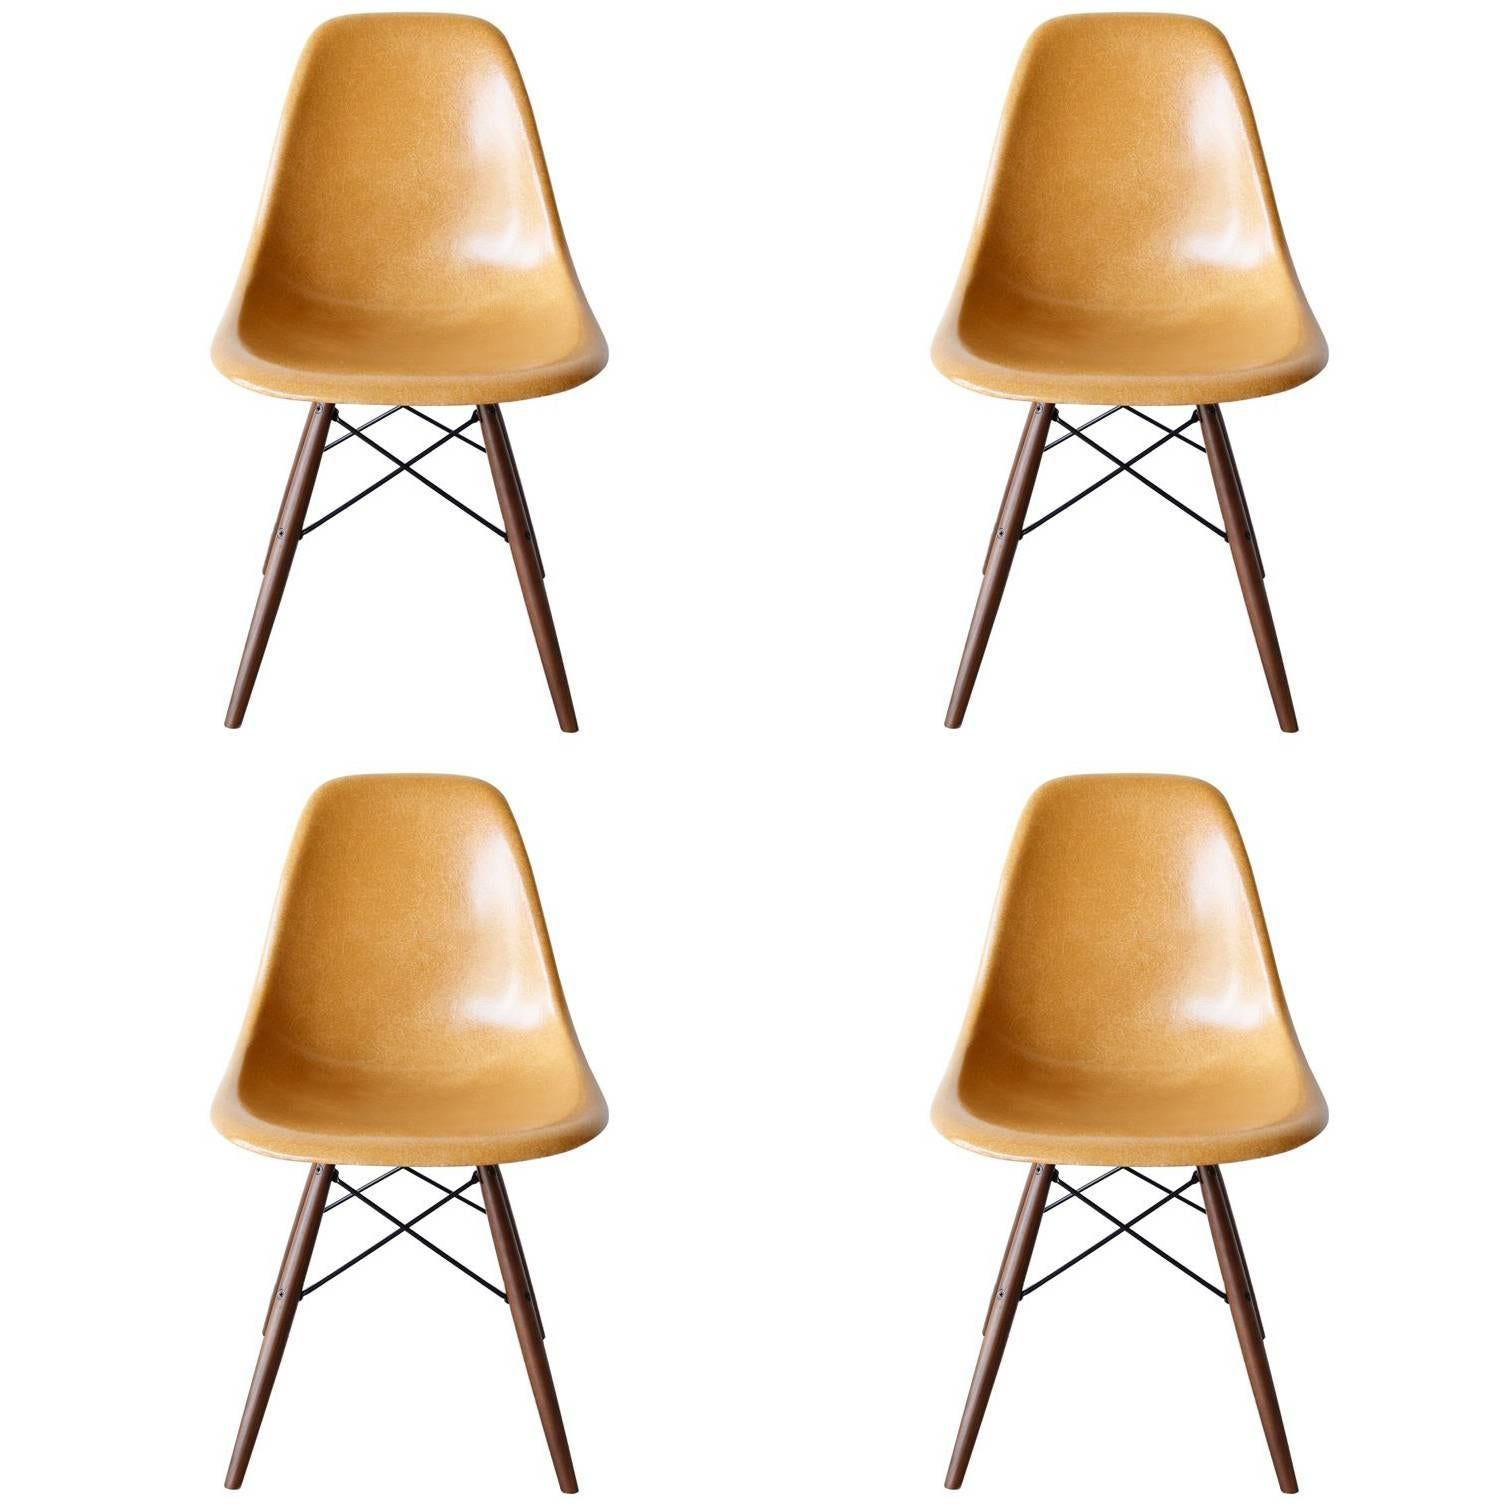 Set of Four Eames Ochre Dark DSW Herman Miller, USA Dining Chairs